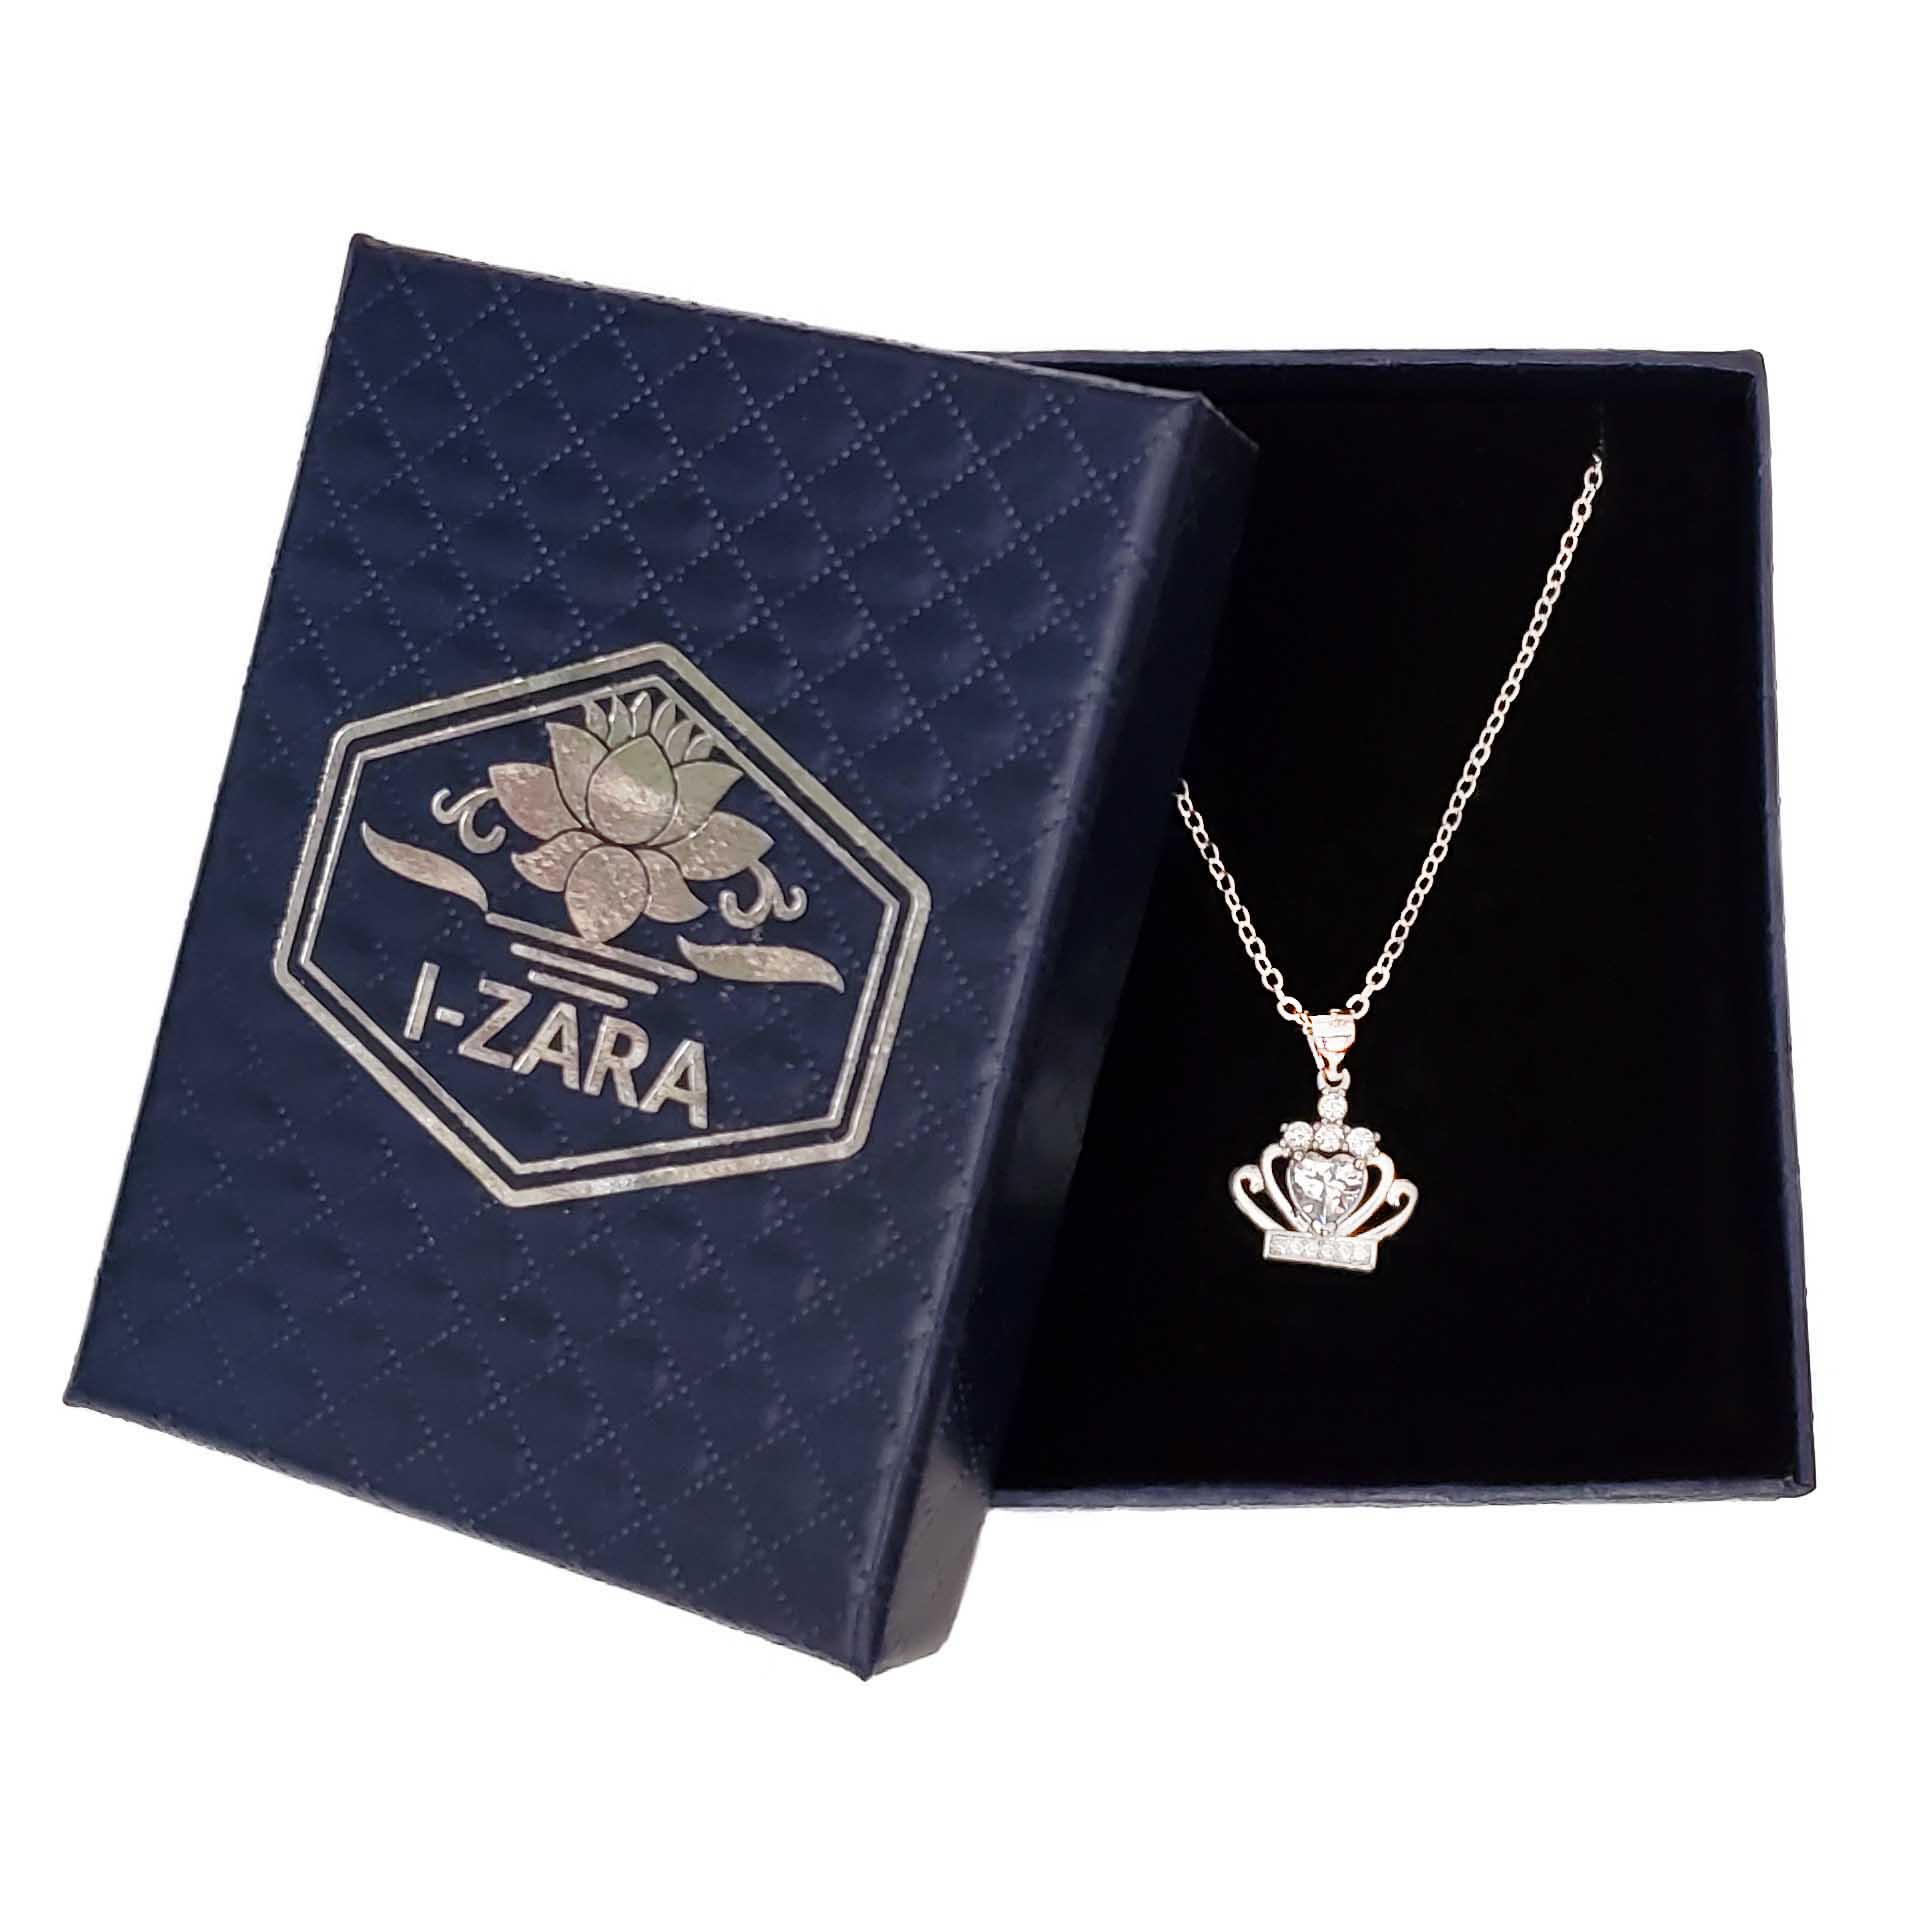 Women's White Gold Plated 925 Sterling Silver Crown Pendant Necklace